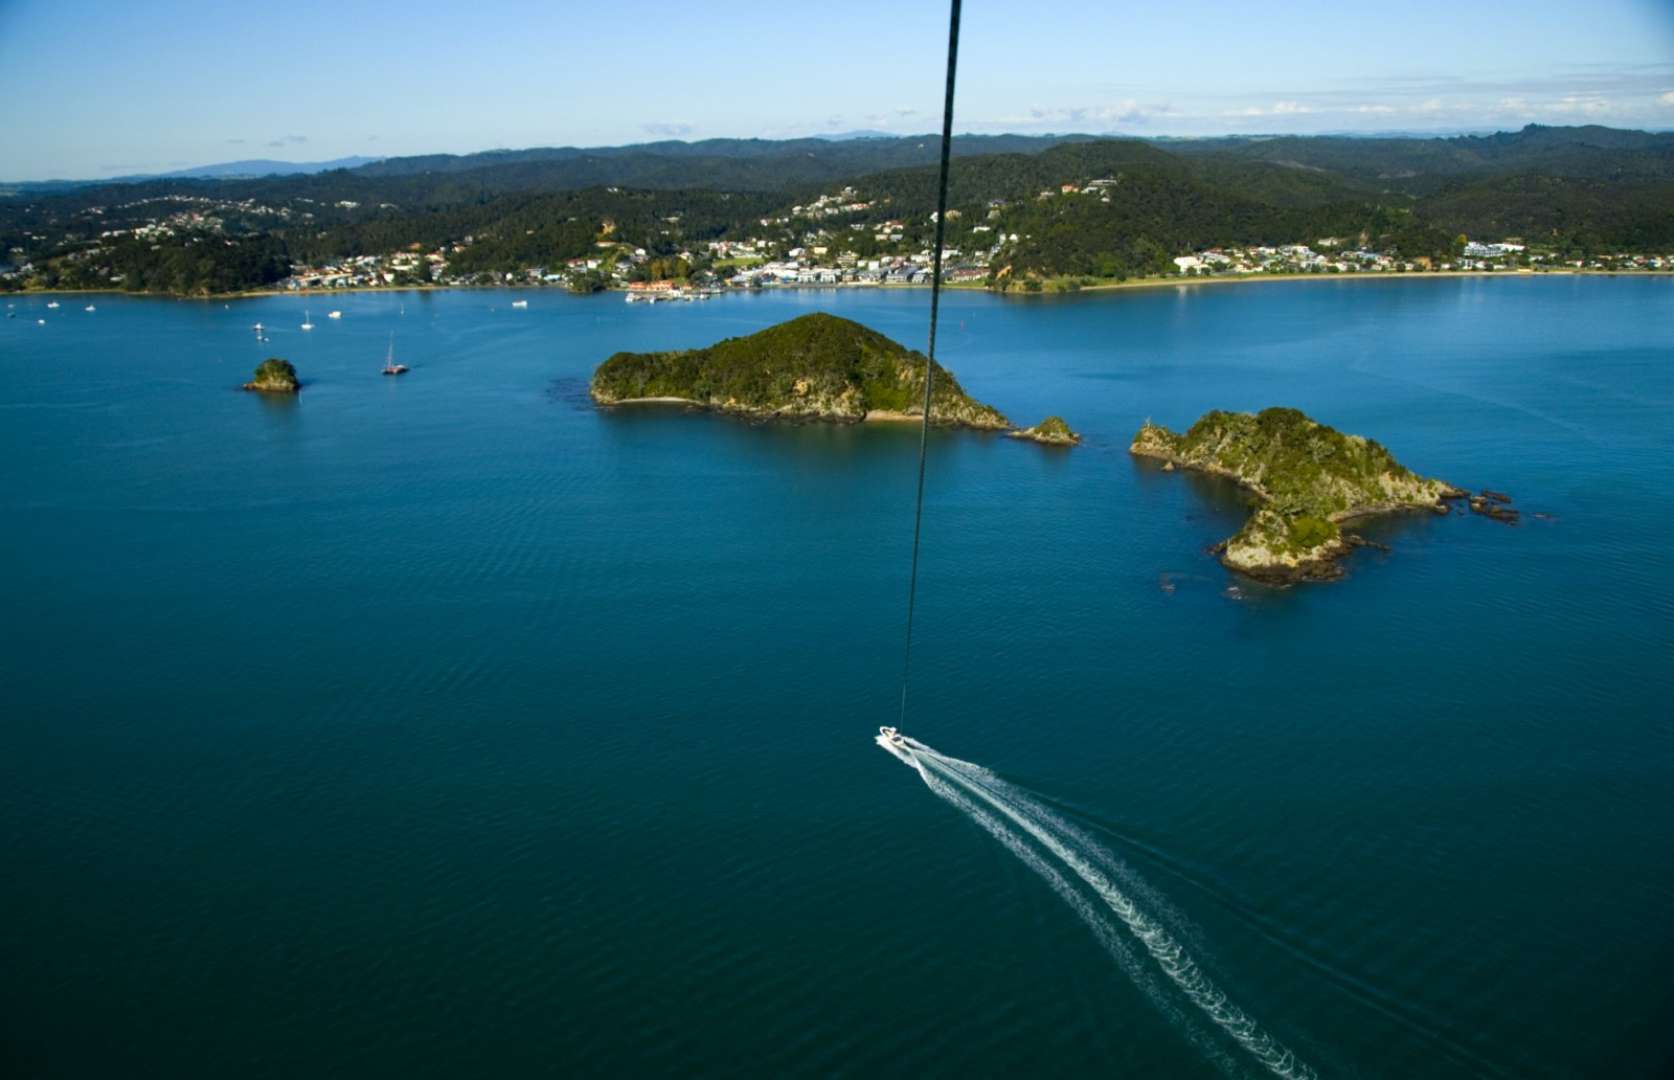 Insane Views over the Bay of Islands